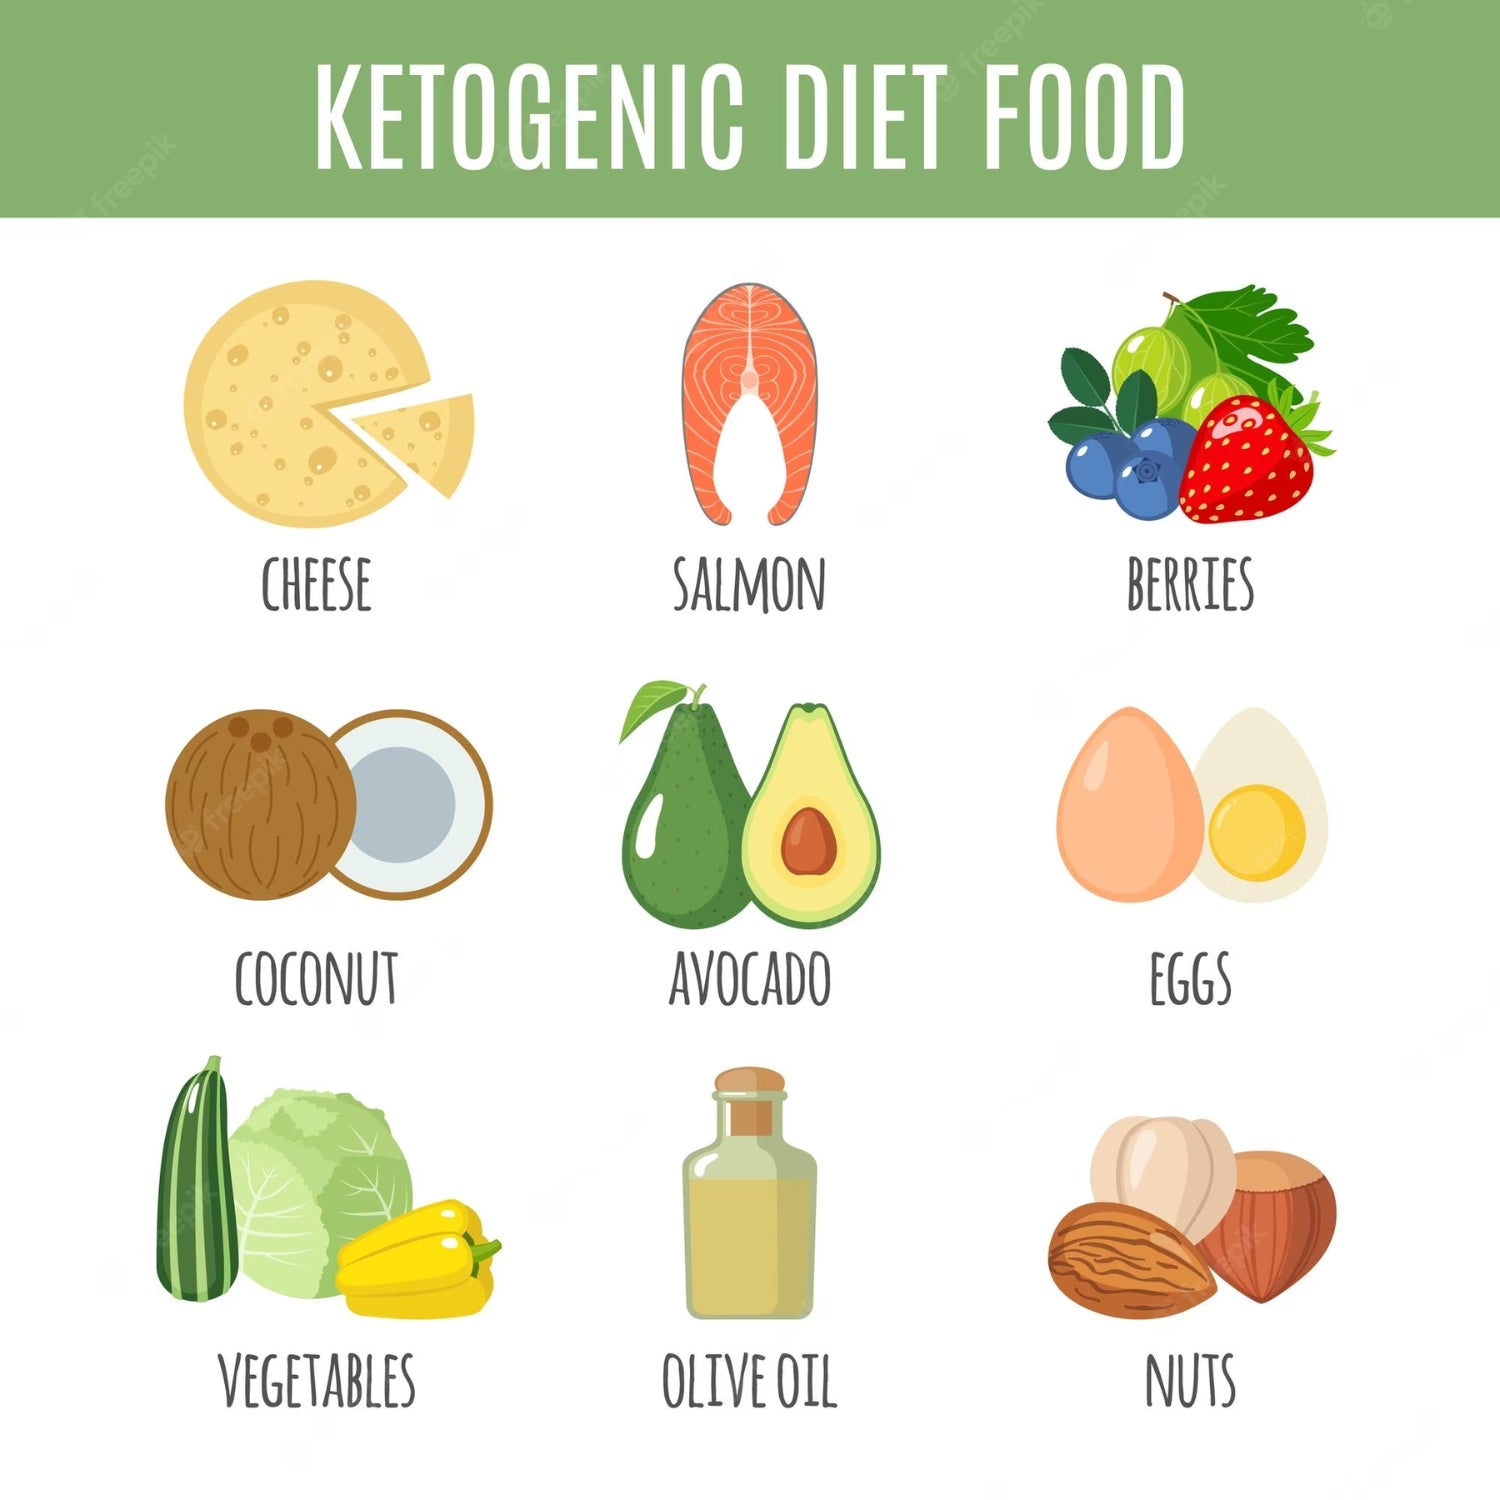 Keto Diet What to Eat